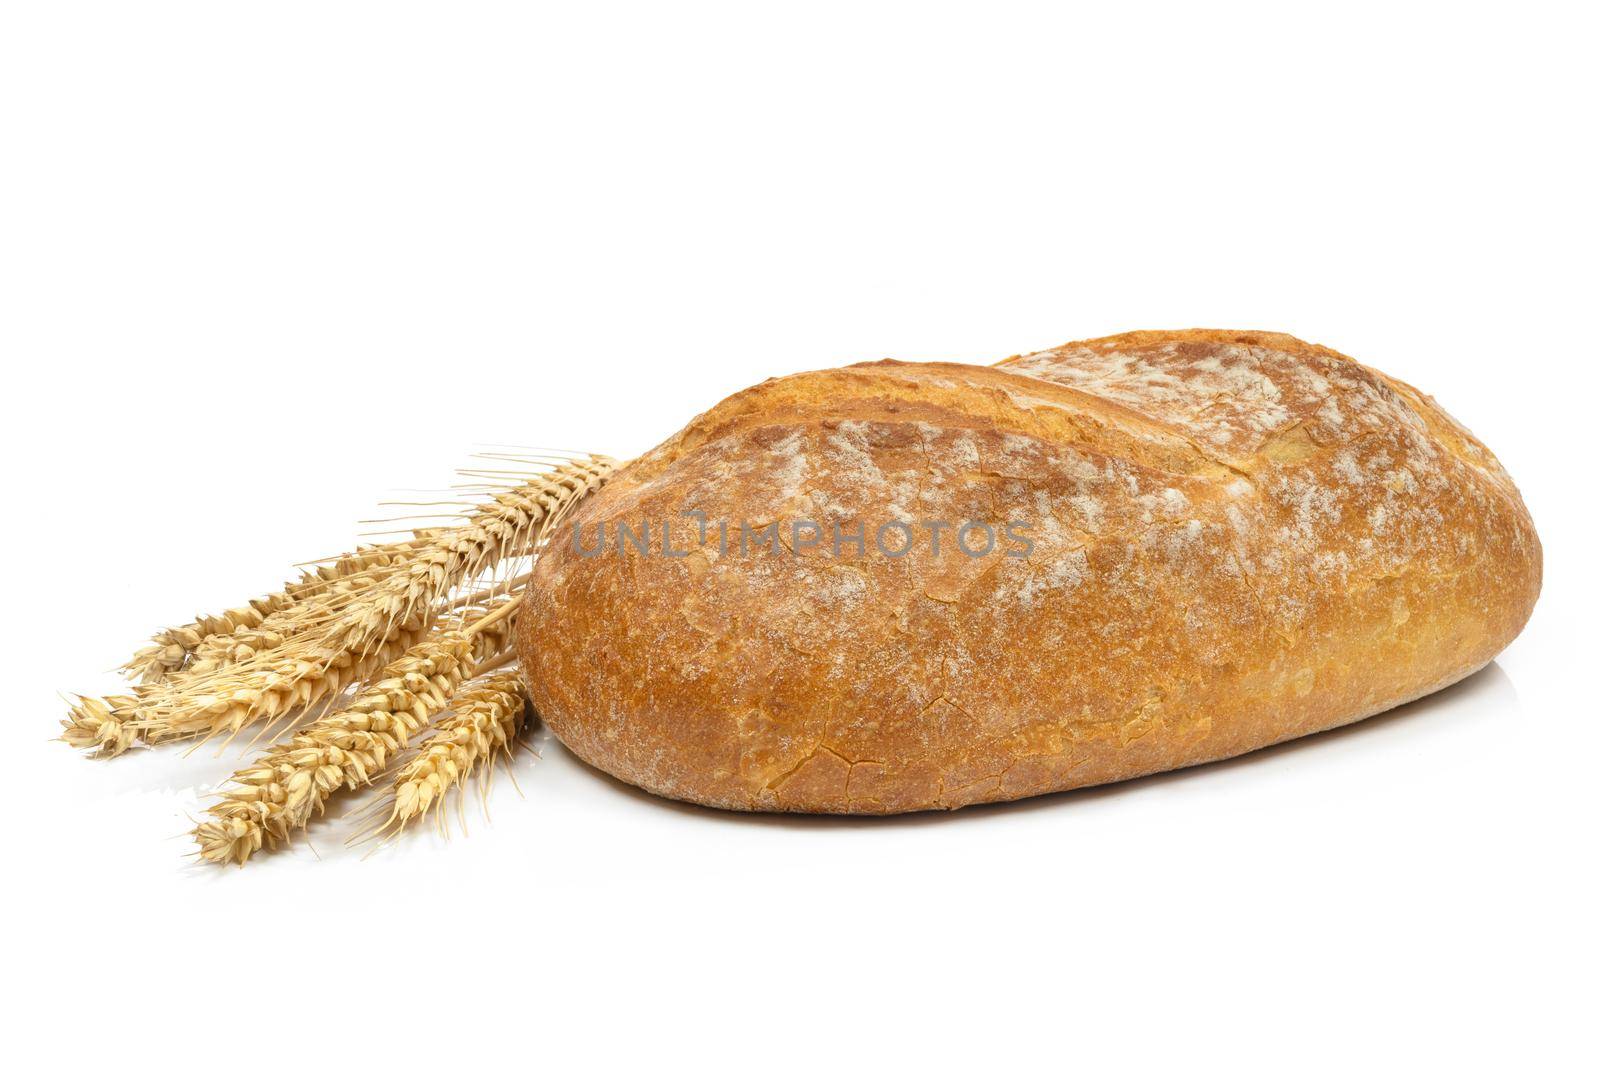 Fresh loaf of bread with wheat grains on a white background in close up.